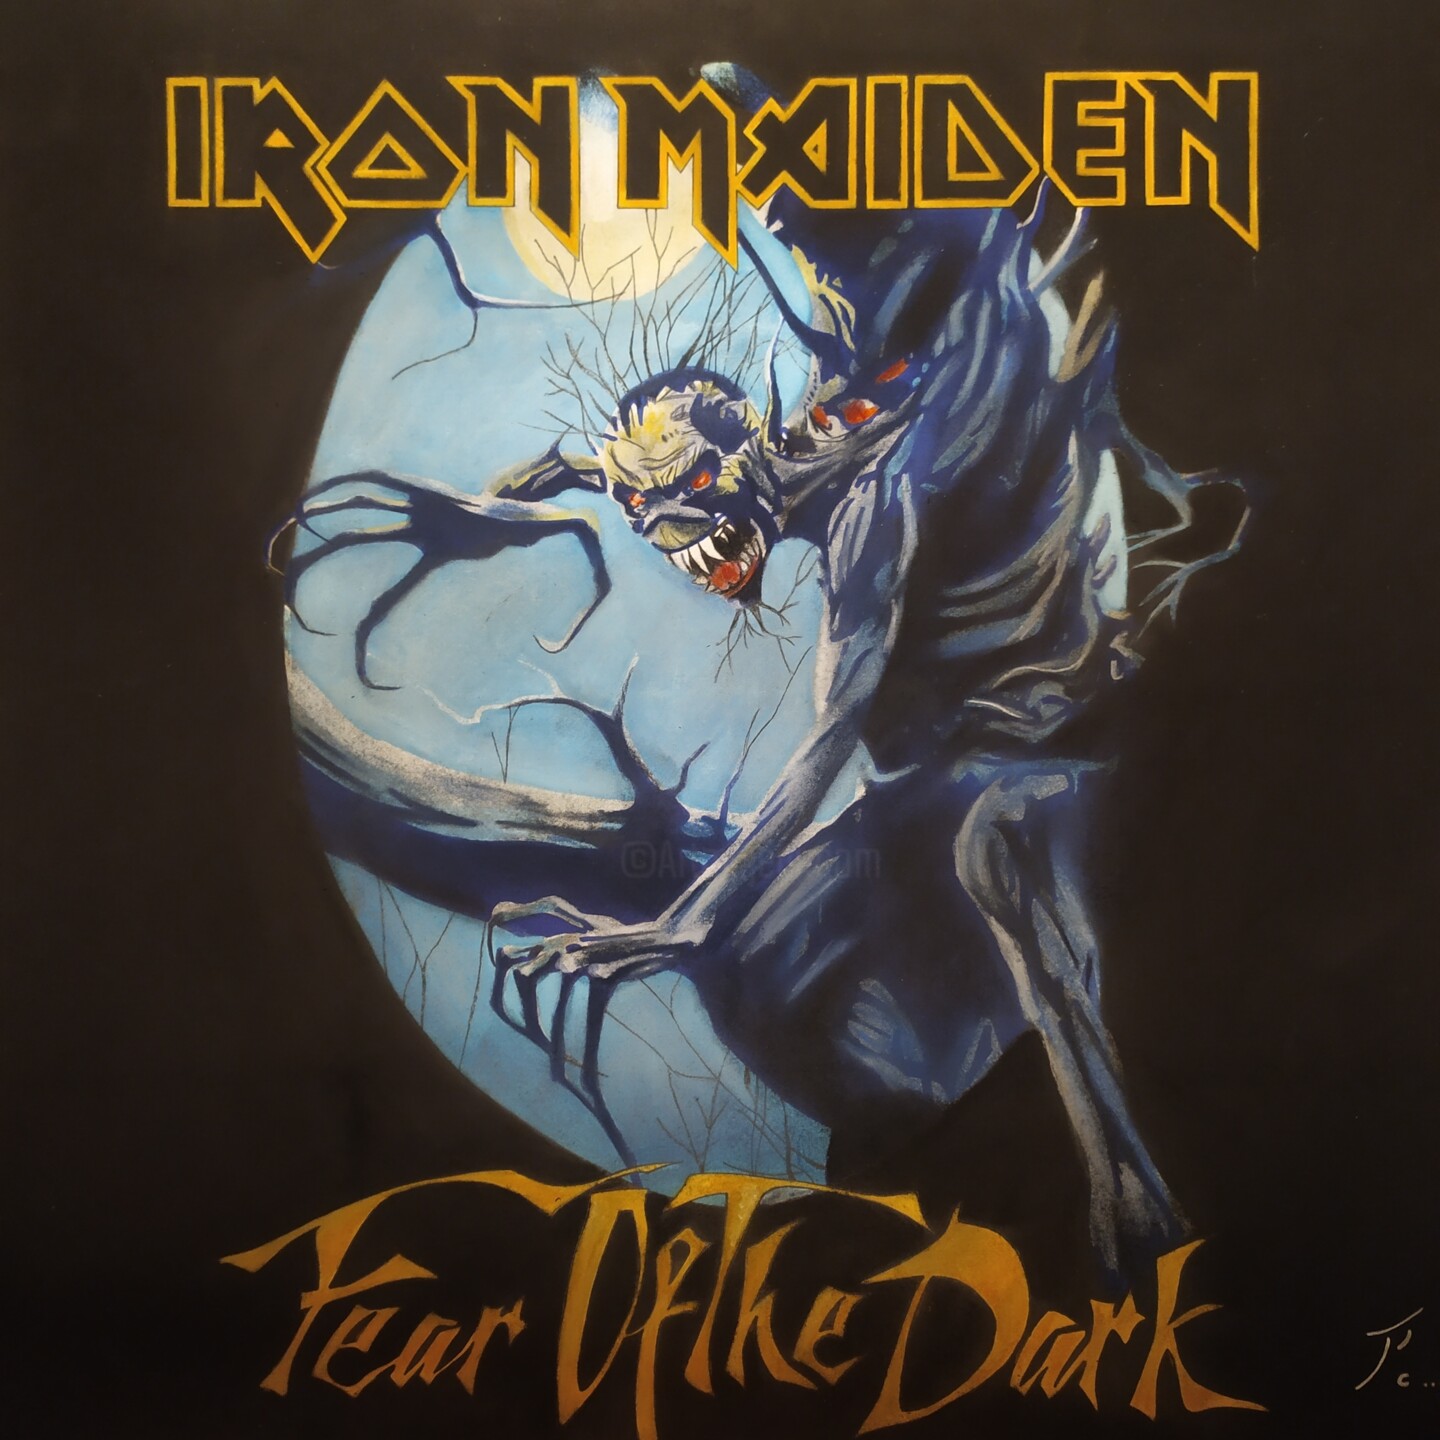 Iron Maiden - Pochette D'album (Fear Of , Drawing by Paul Clair | Artmajeur